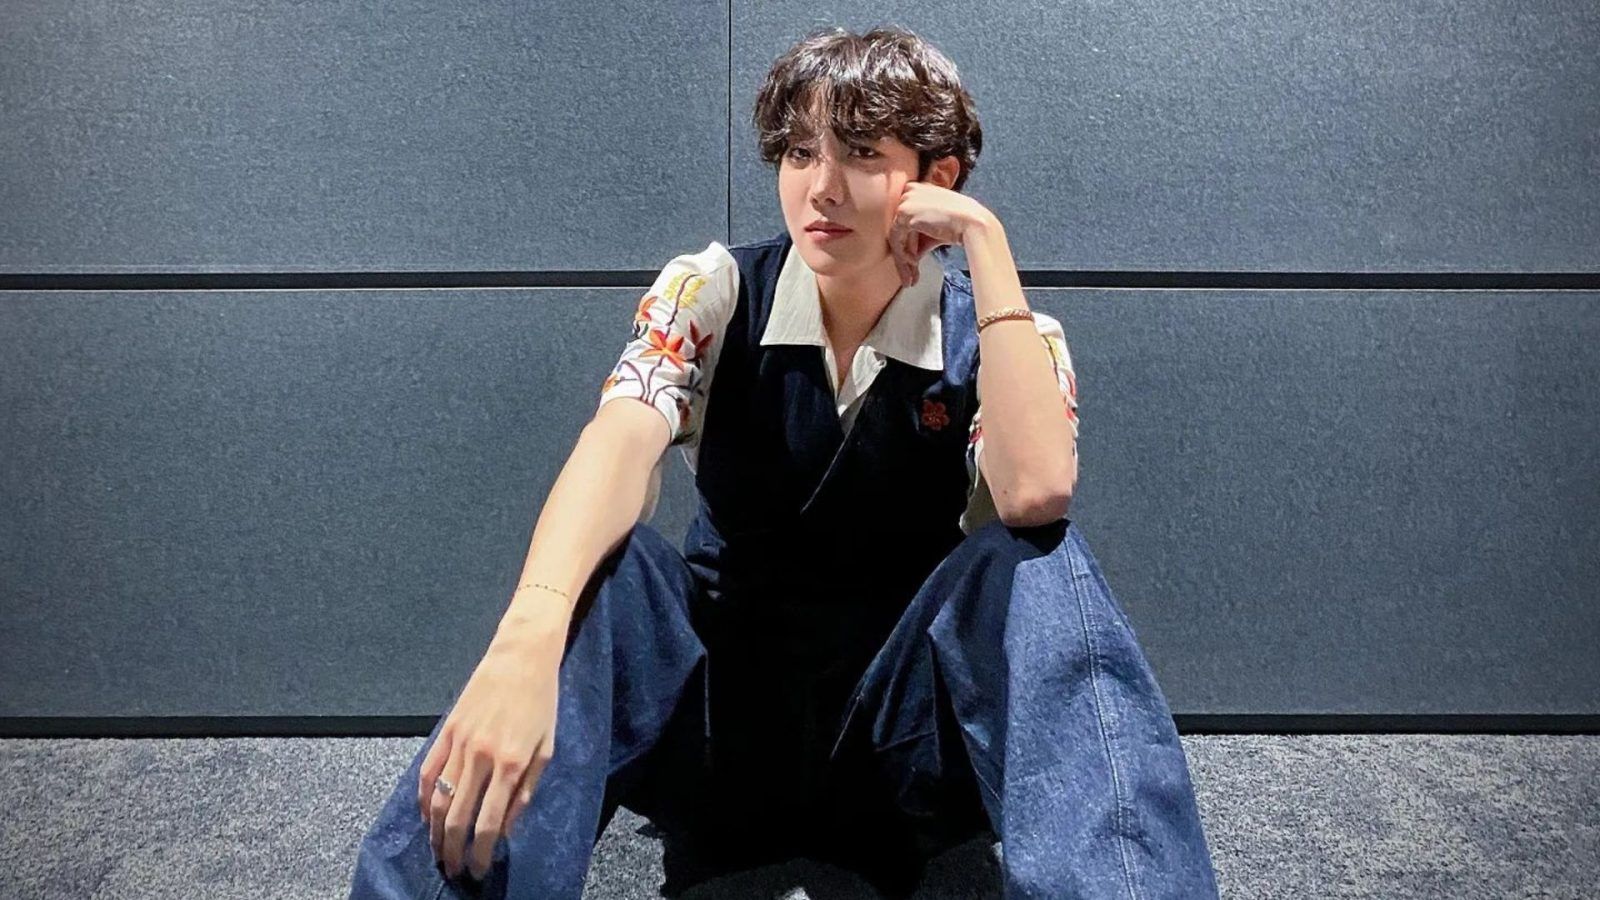 From LV to Balenciaga: A look at luxurious shoes owned by fashionista BTS J-Hope